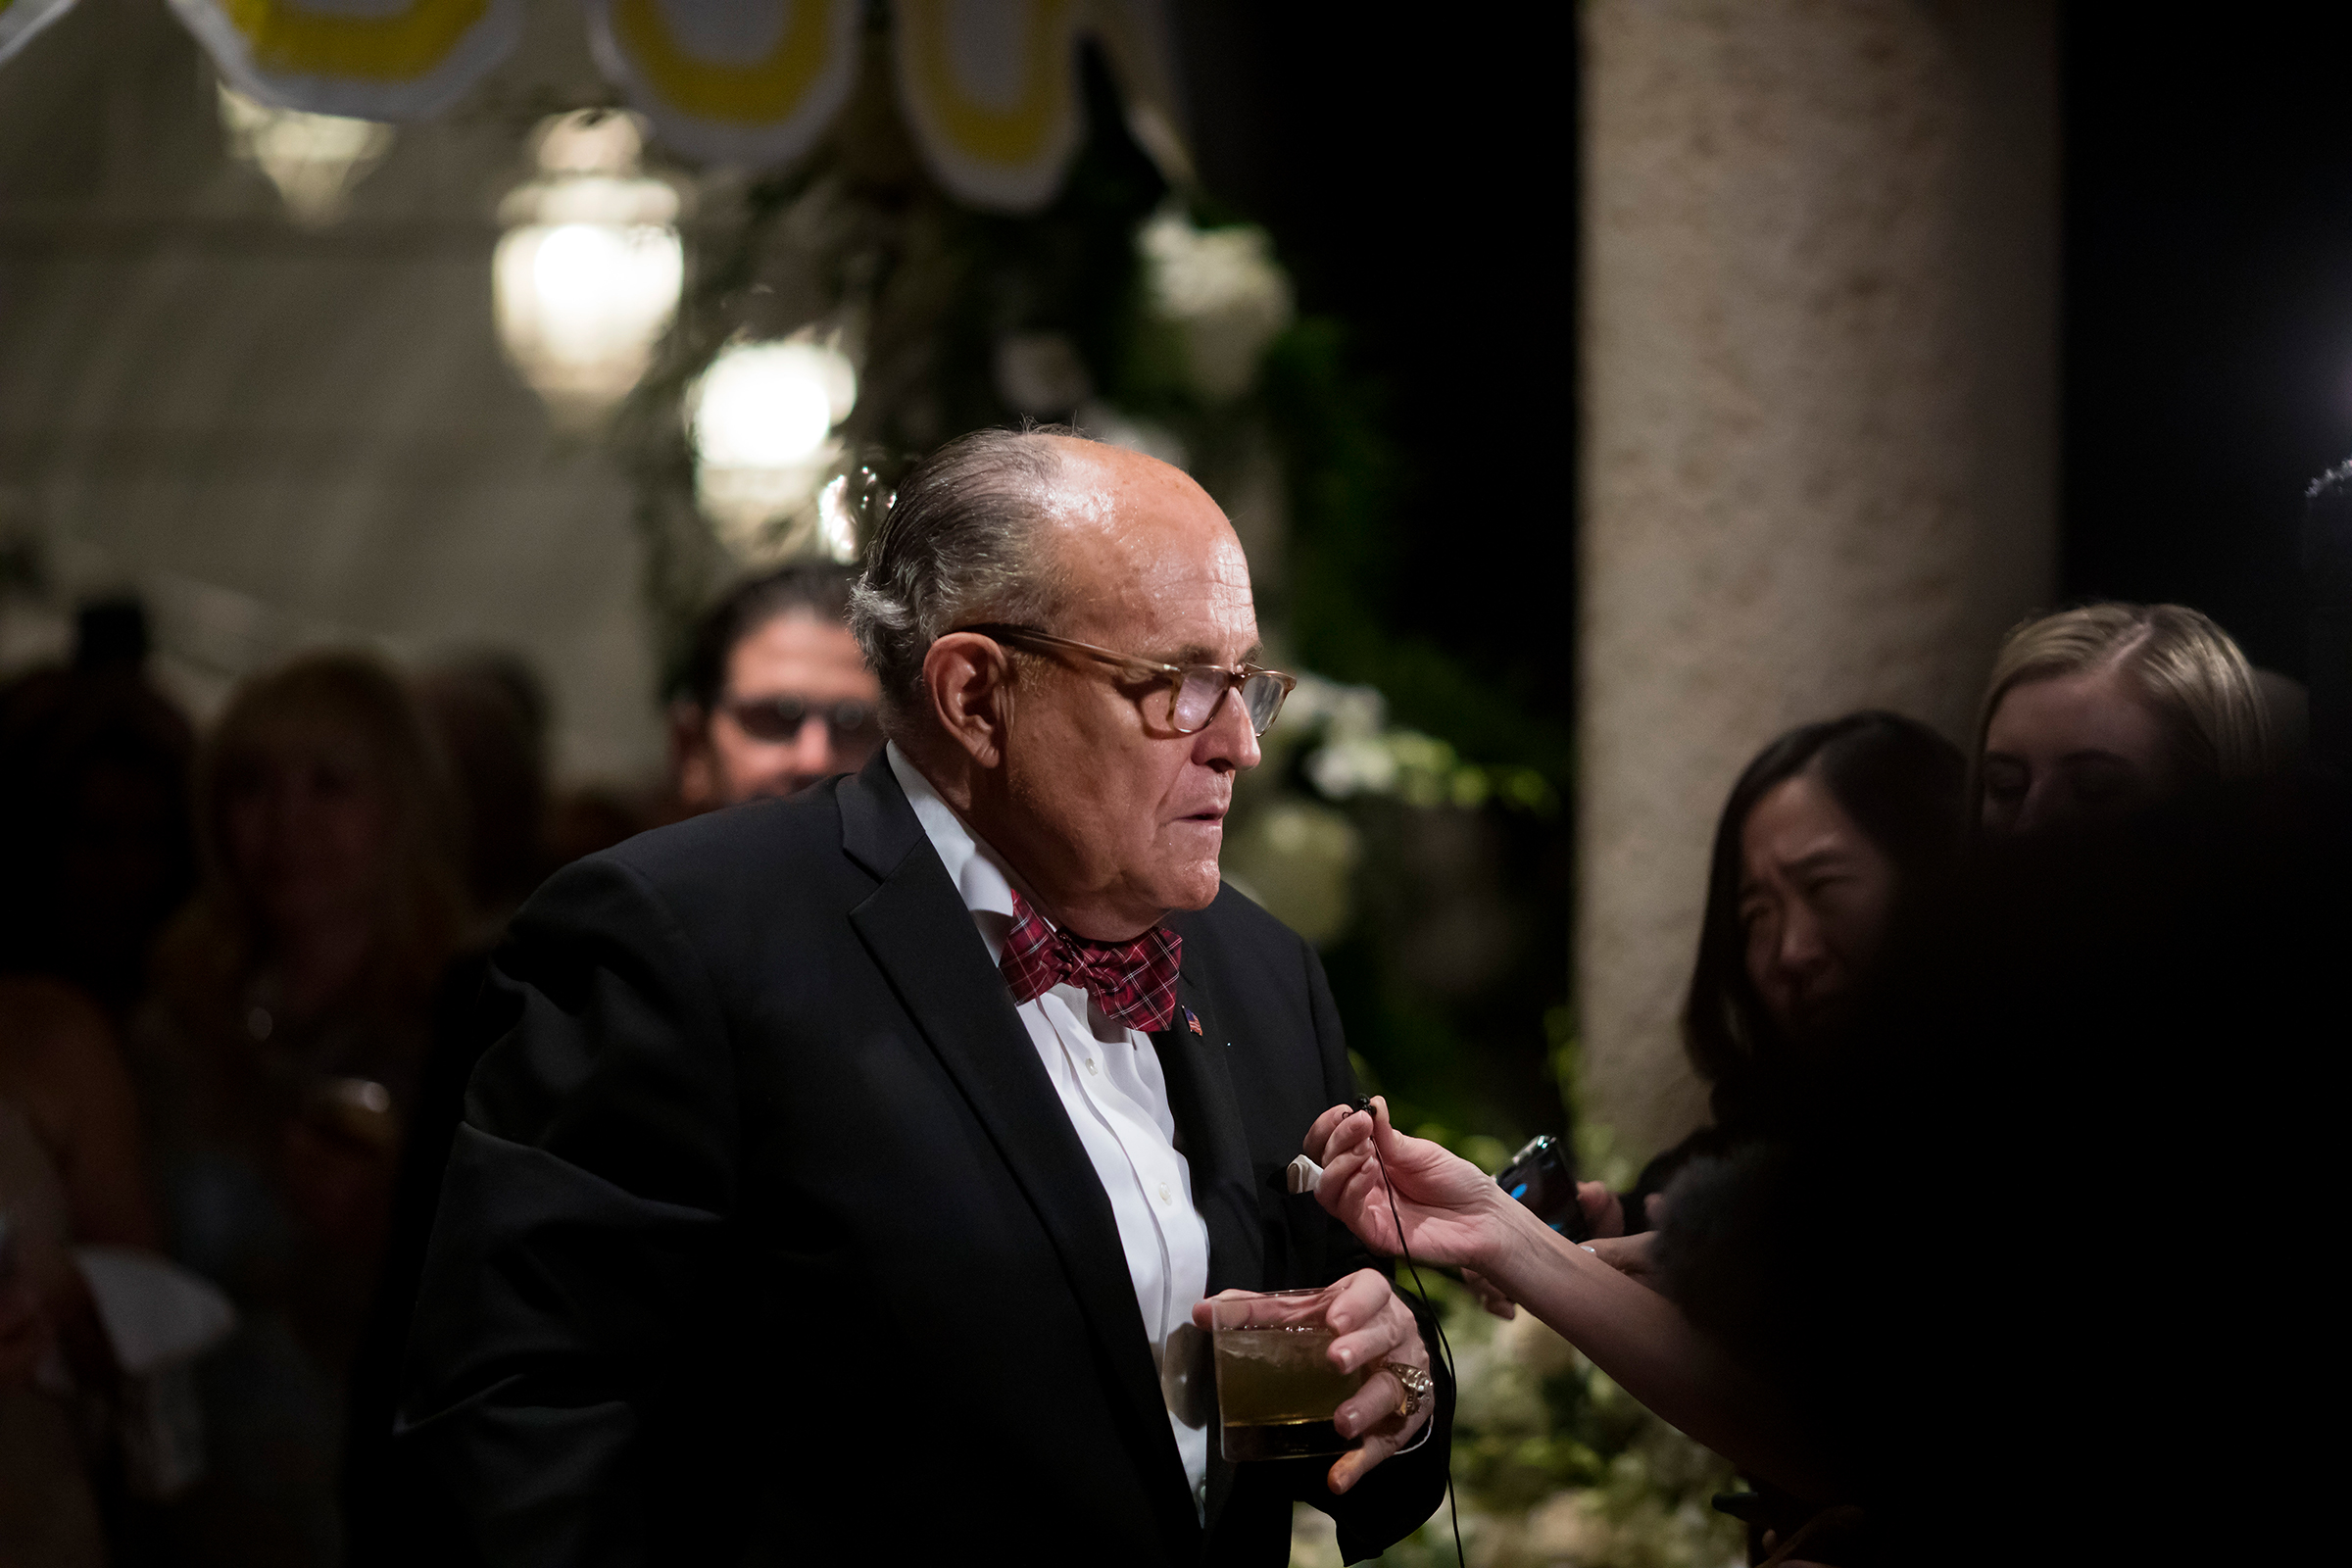 Rudy Giuliani, President Donald Trump's personal lawyer, speaks to reporters at the Mar-a-Lago resort in Palm Beach, Fla., on Dec. 31, 2019.